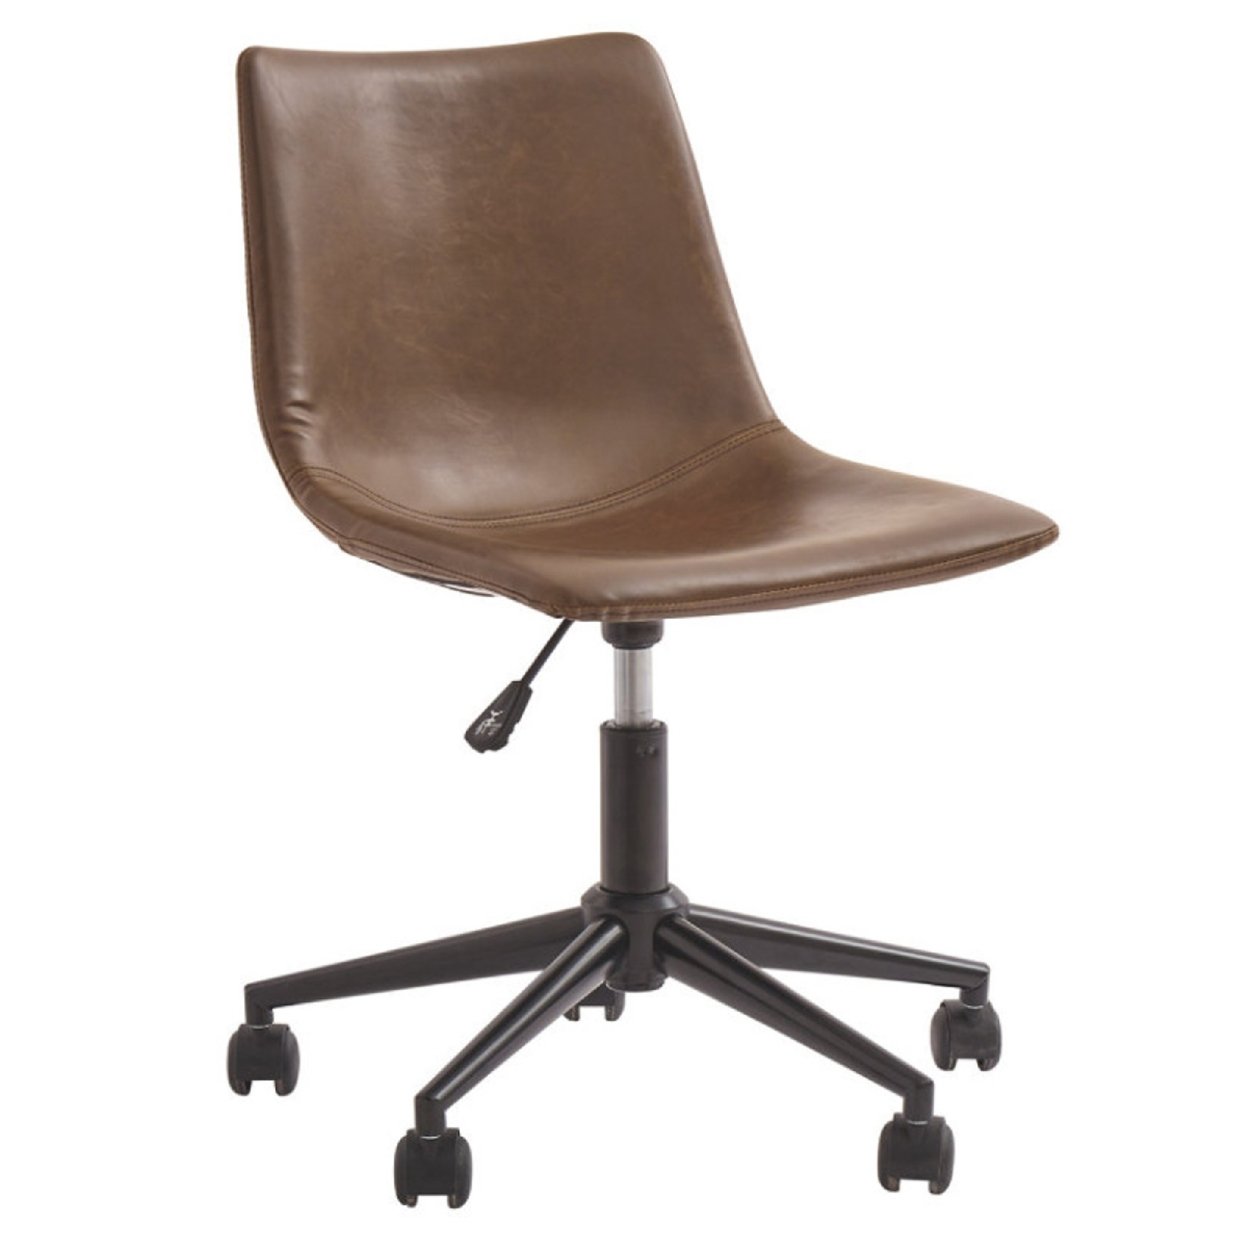 Metal Swivel Chair With Faux Leather Upholstery And Adjustable Seat, Brown And Black- Saltoro Sherpi